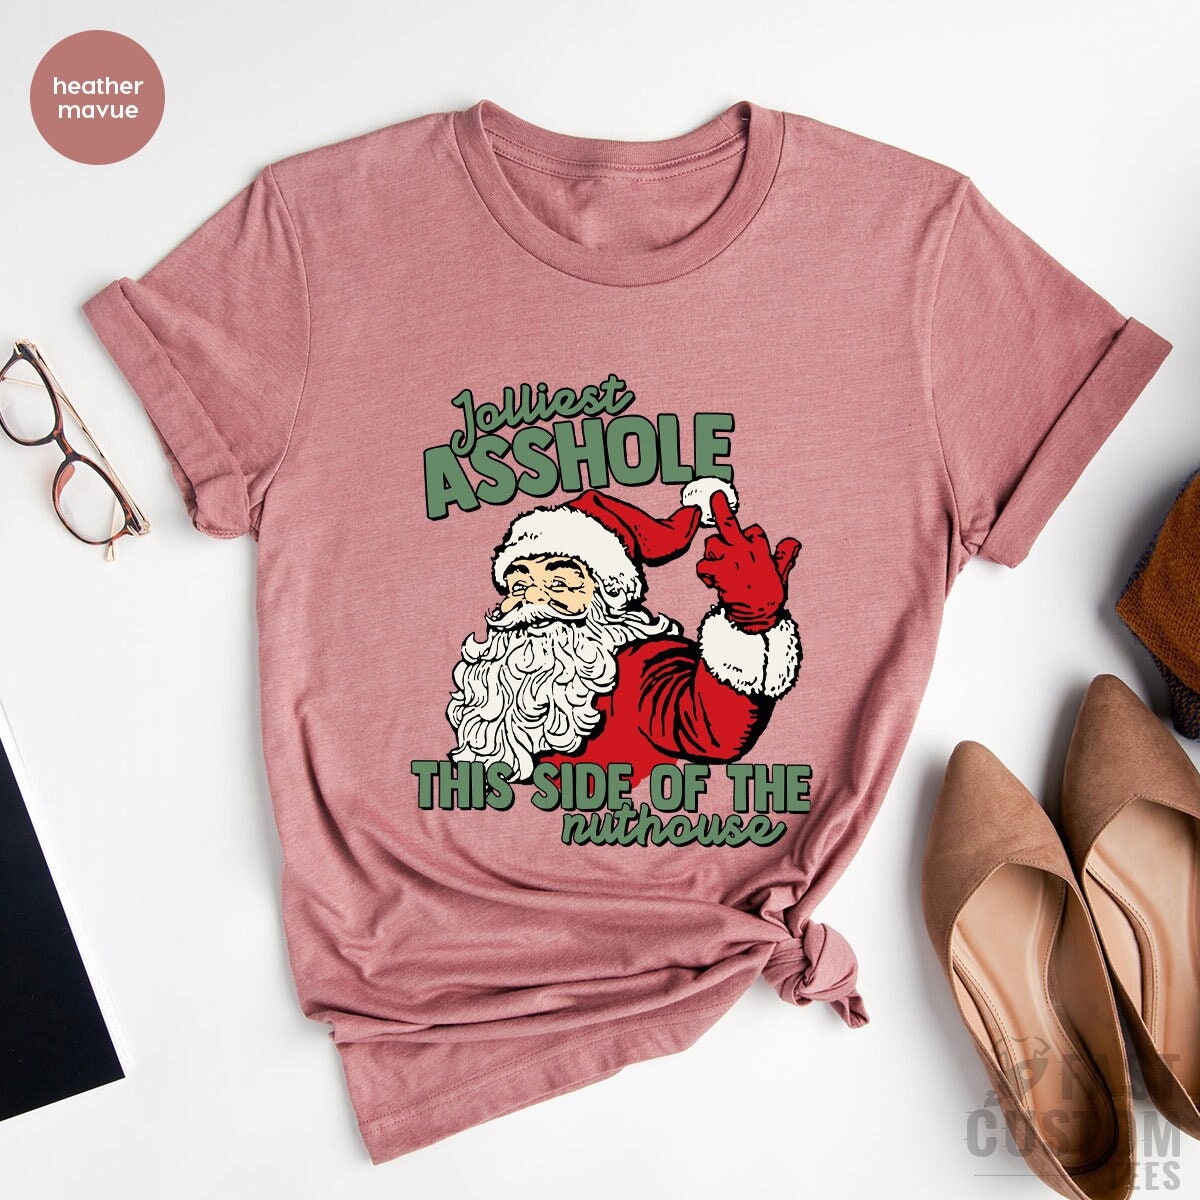 Jolliest Bunch of Assholes Shirt This Side of The Nuthouse Shirt, Christmas Family T-shirt, Funny Christmas, Christmas Tee, Christmas 2022 - Fastdeliverytees.com